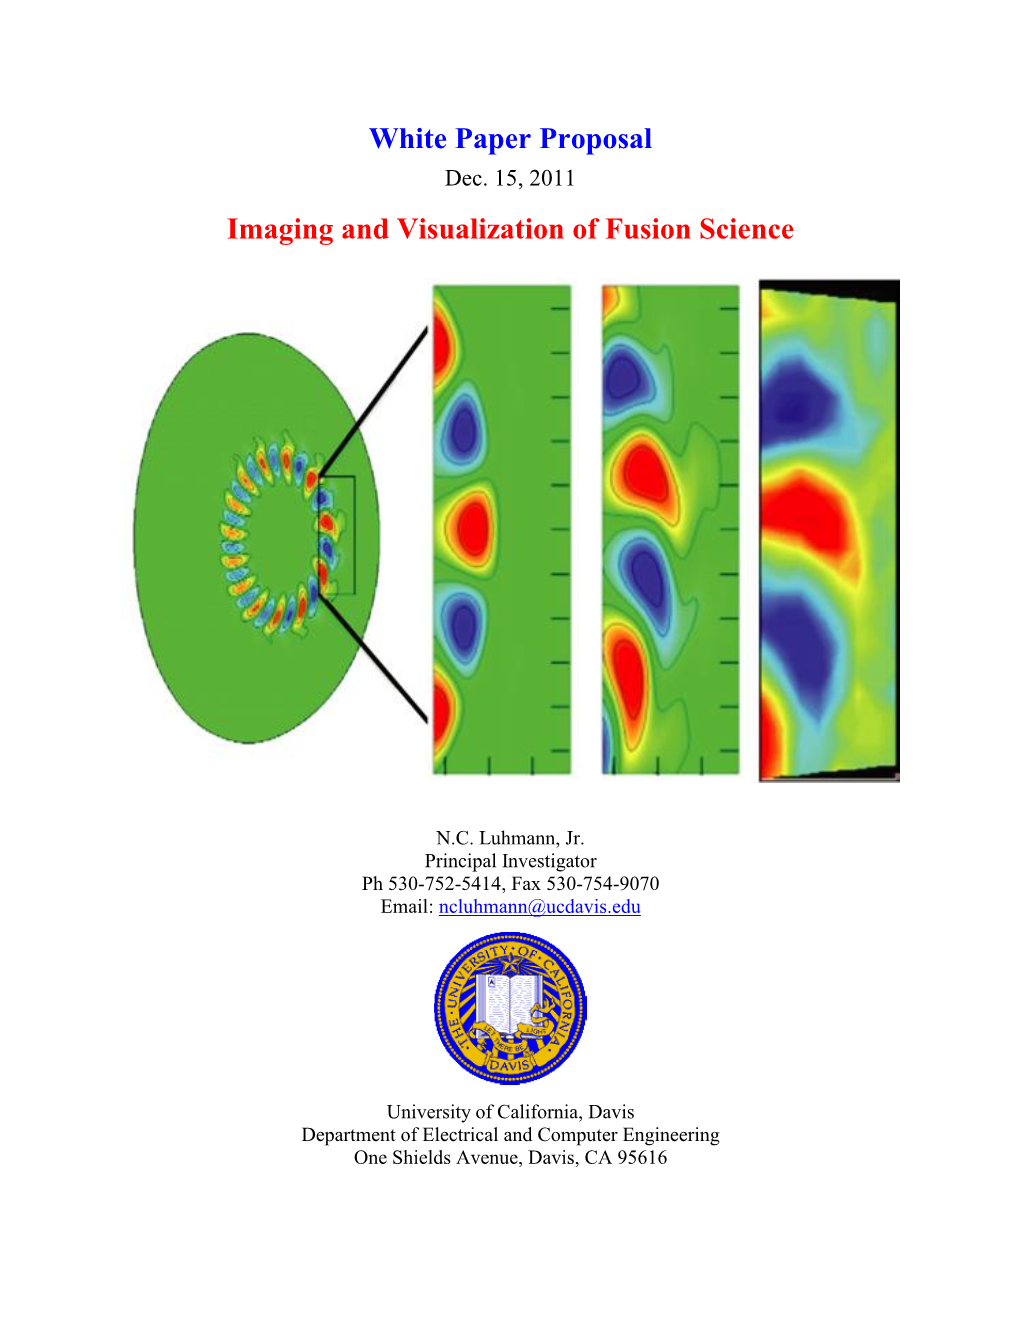 Imaging and Visualization Diagnostic for Collaboration